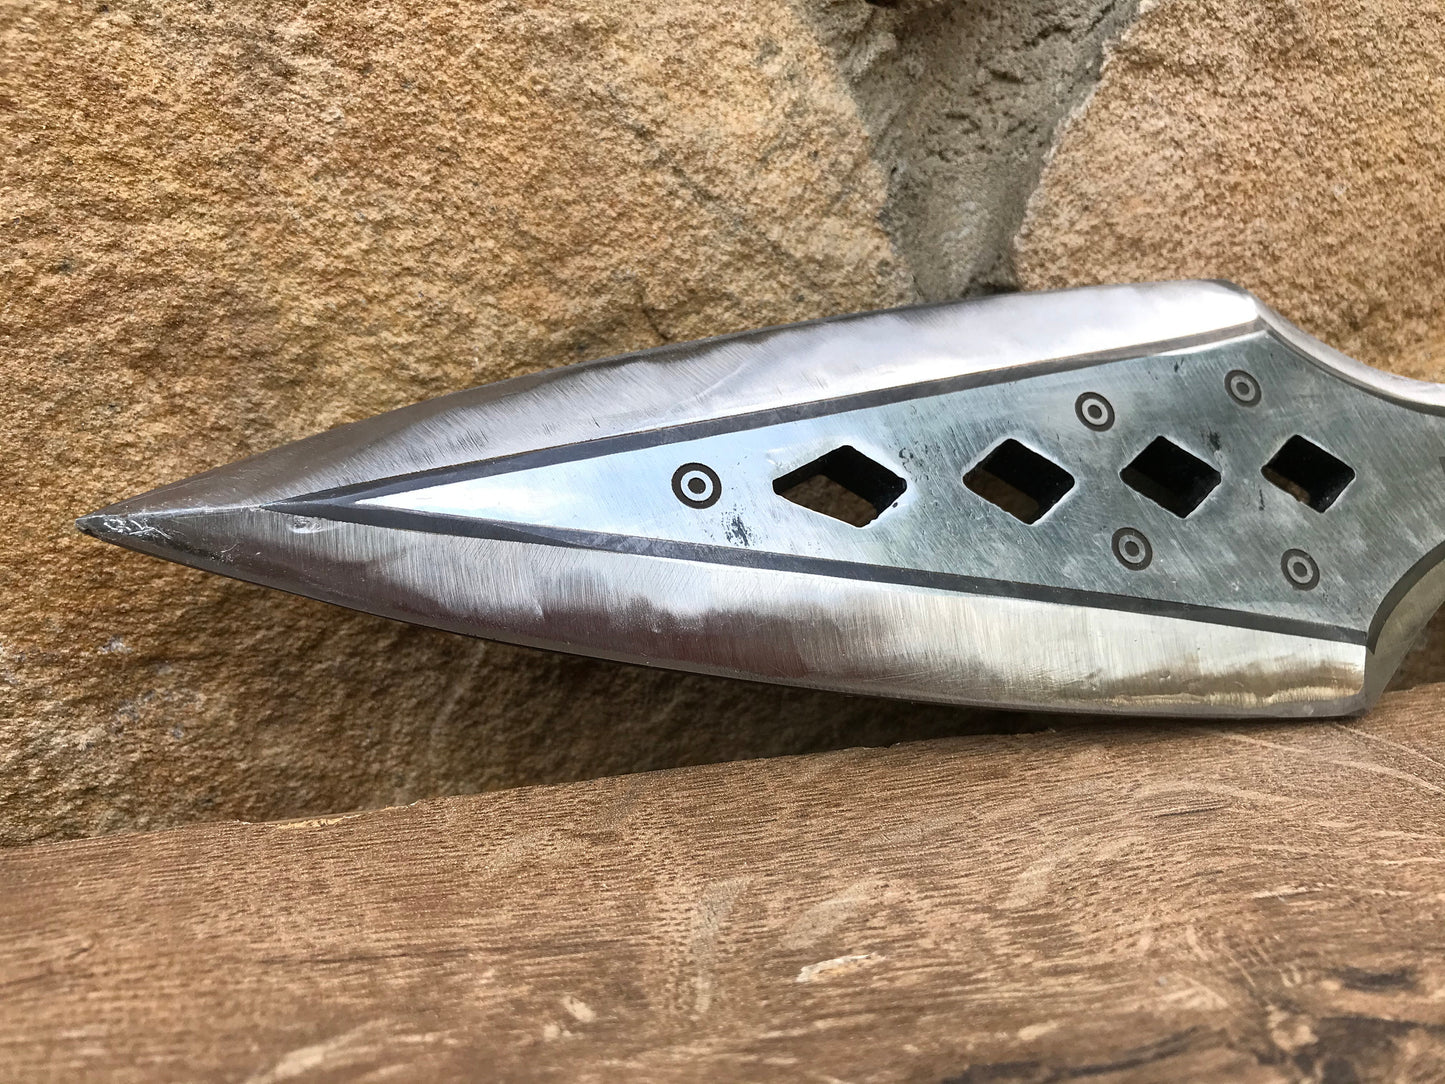 Wraith heirloom knife, Apex Legends, kunai, cosplay knife, iron gift, 6th anniversary, gift for men, axe, knife gift, iron anniversary,knife